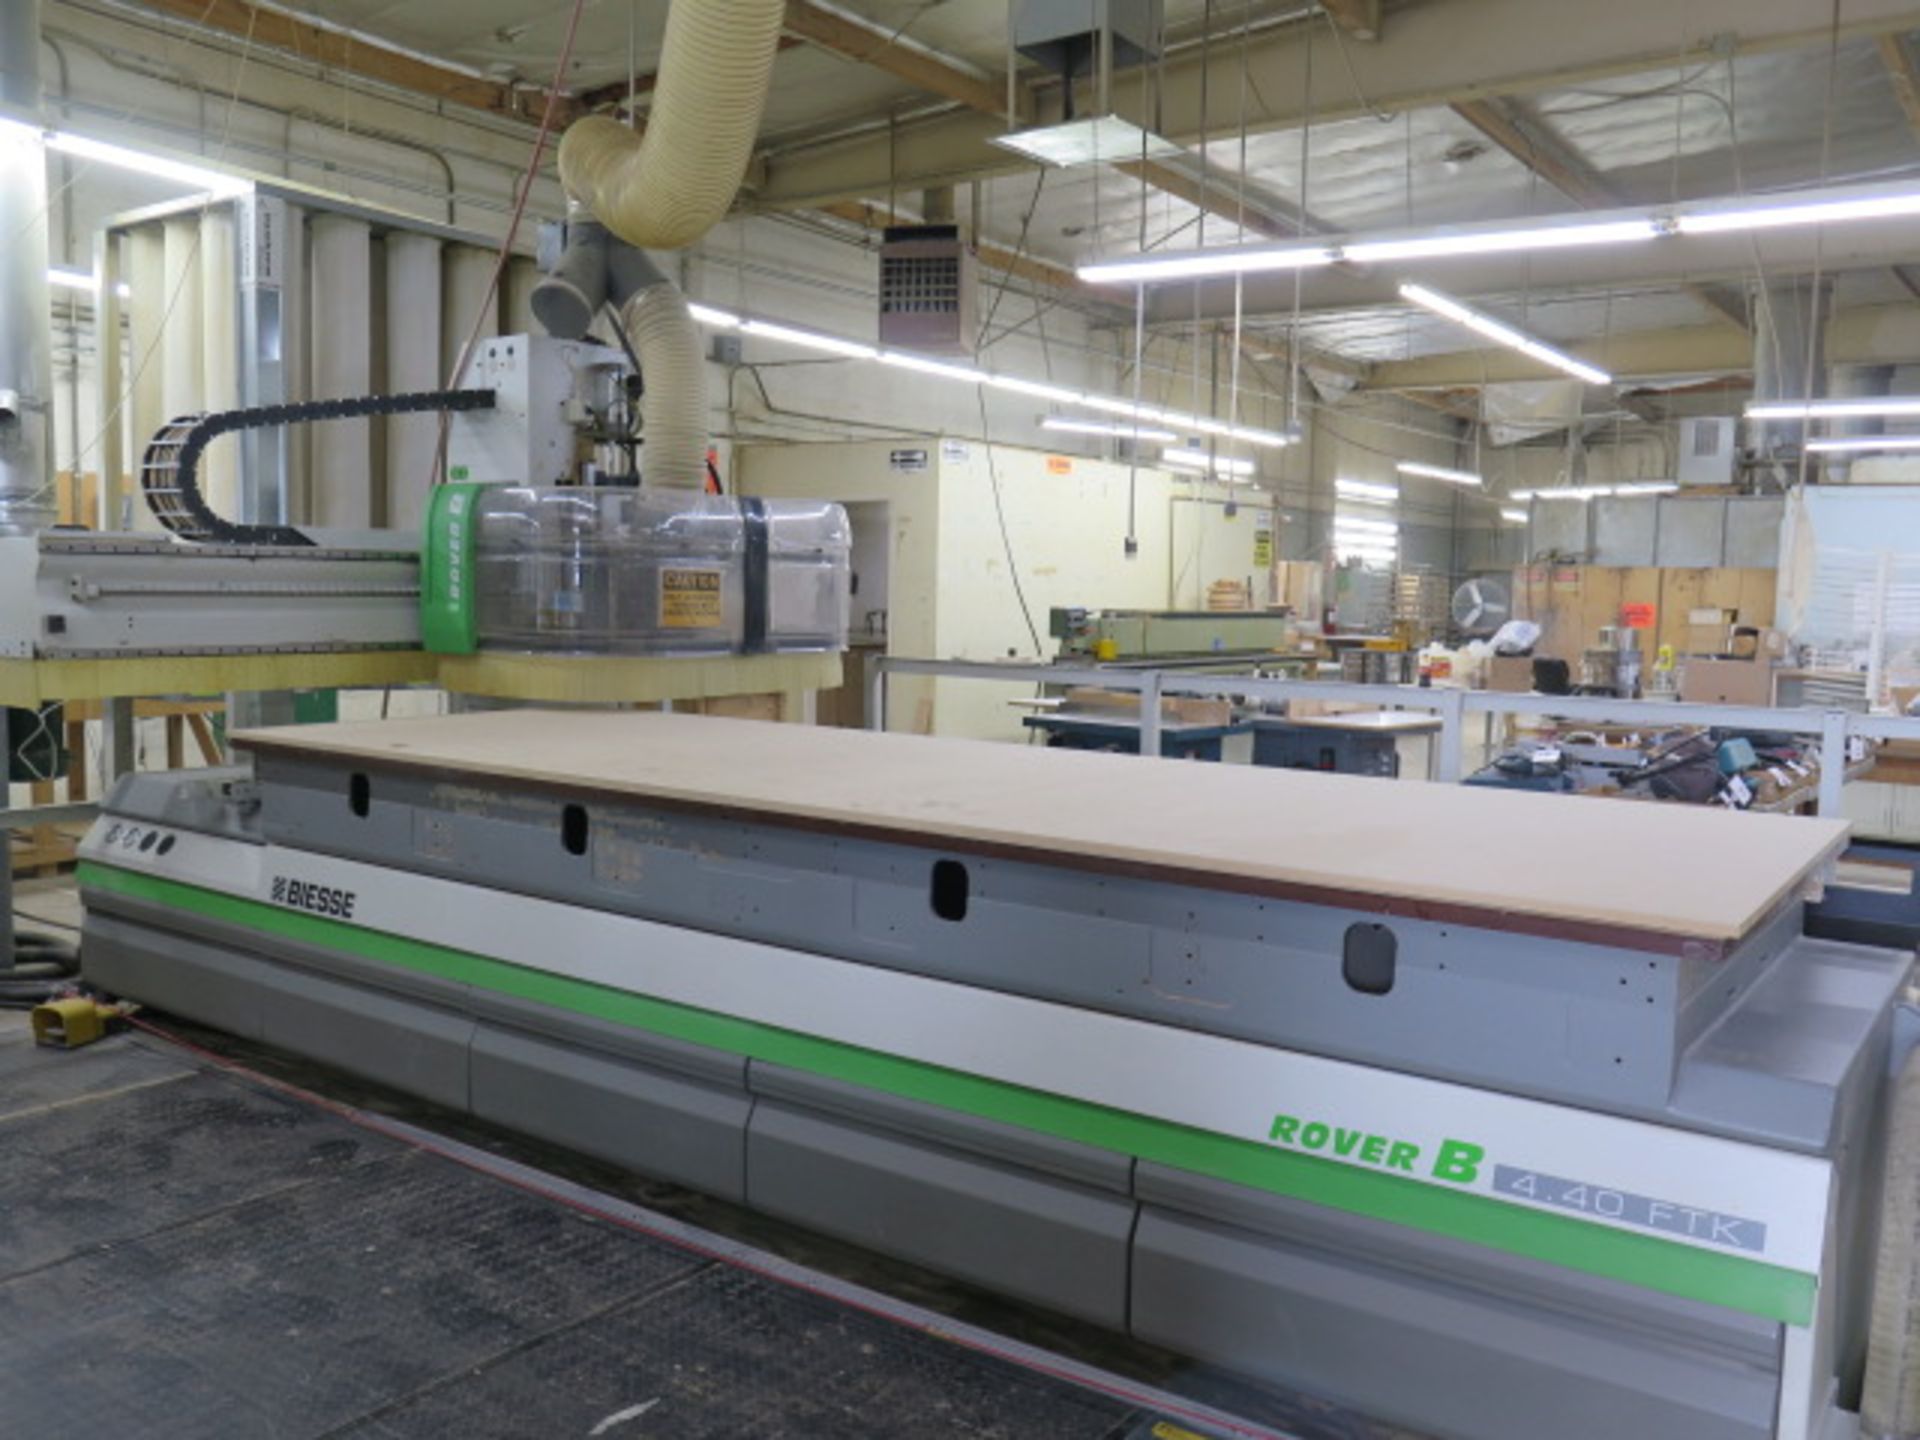 2006 Biesse Rover B4.40 FT-K 16-Spindle CNC Router s/n 59006 w/ Biesse CNC Controls, SOLD AS IS - Image 2 of 24